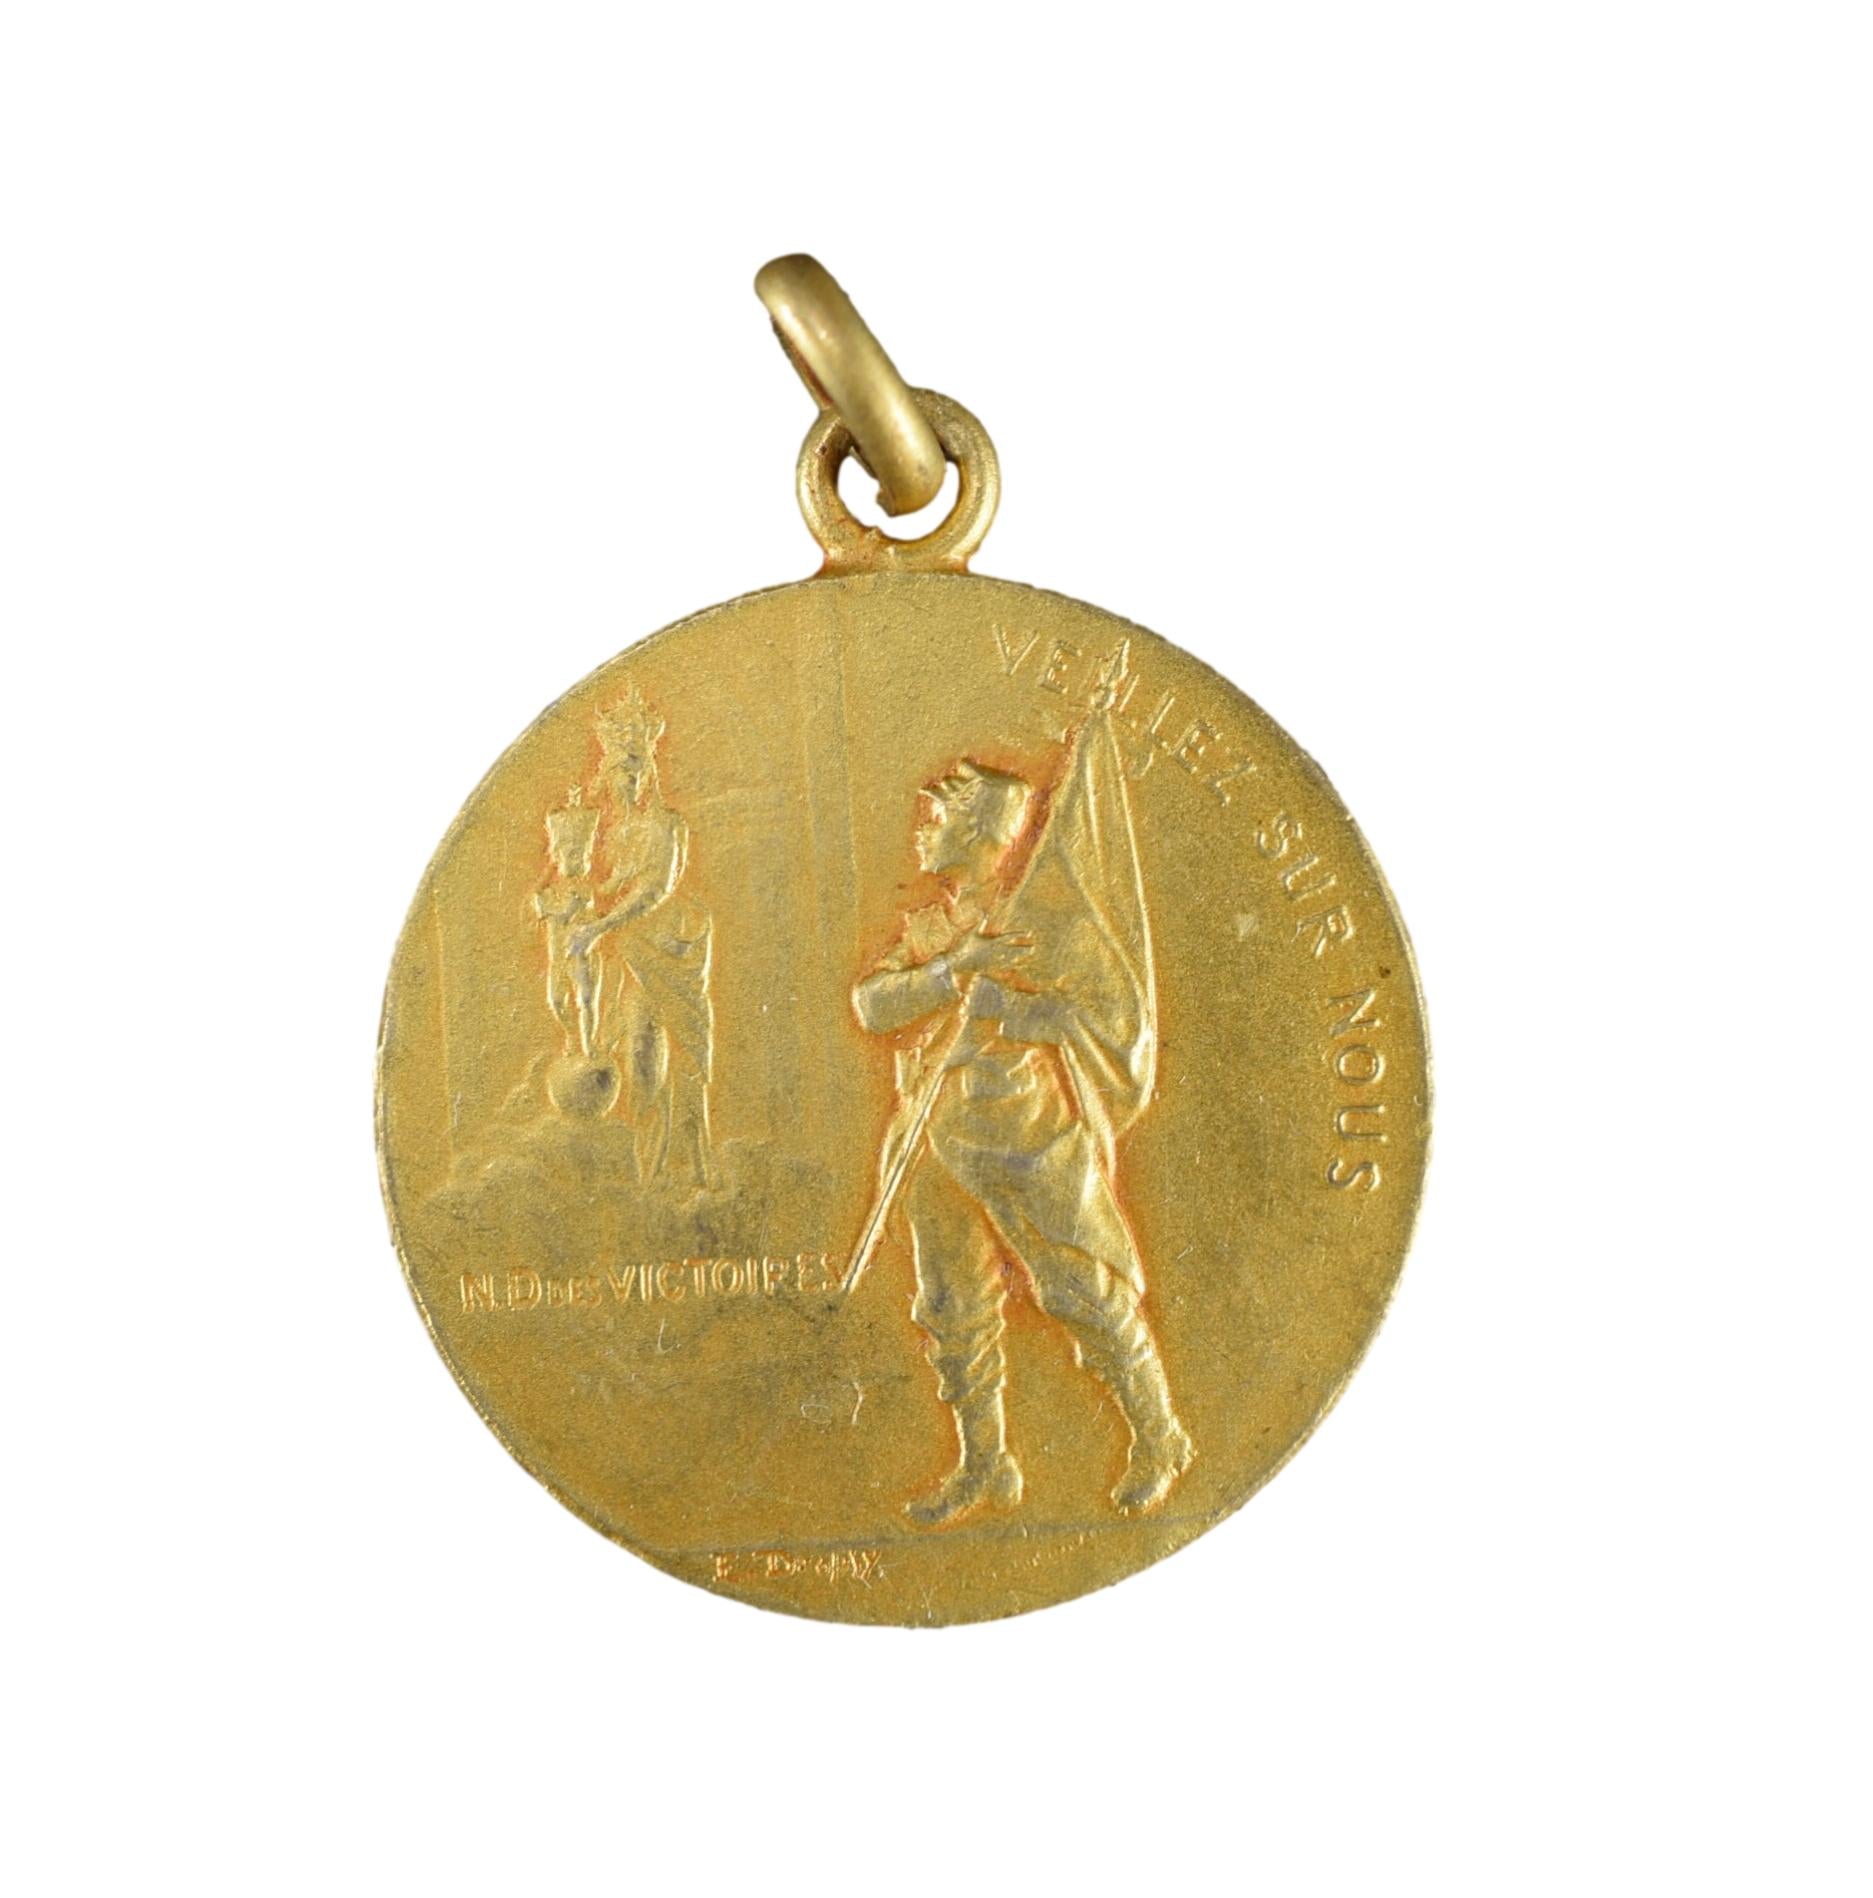 Our Lady of Victory Medal WWI Gold Pendant by Emile Dropsy